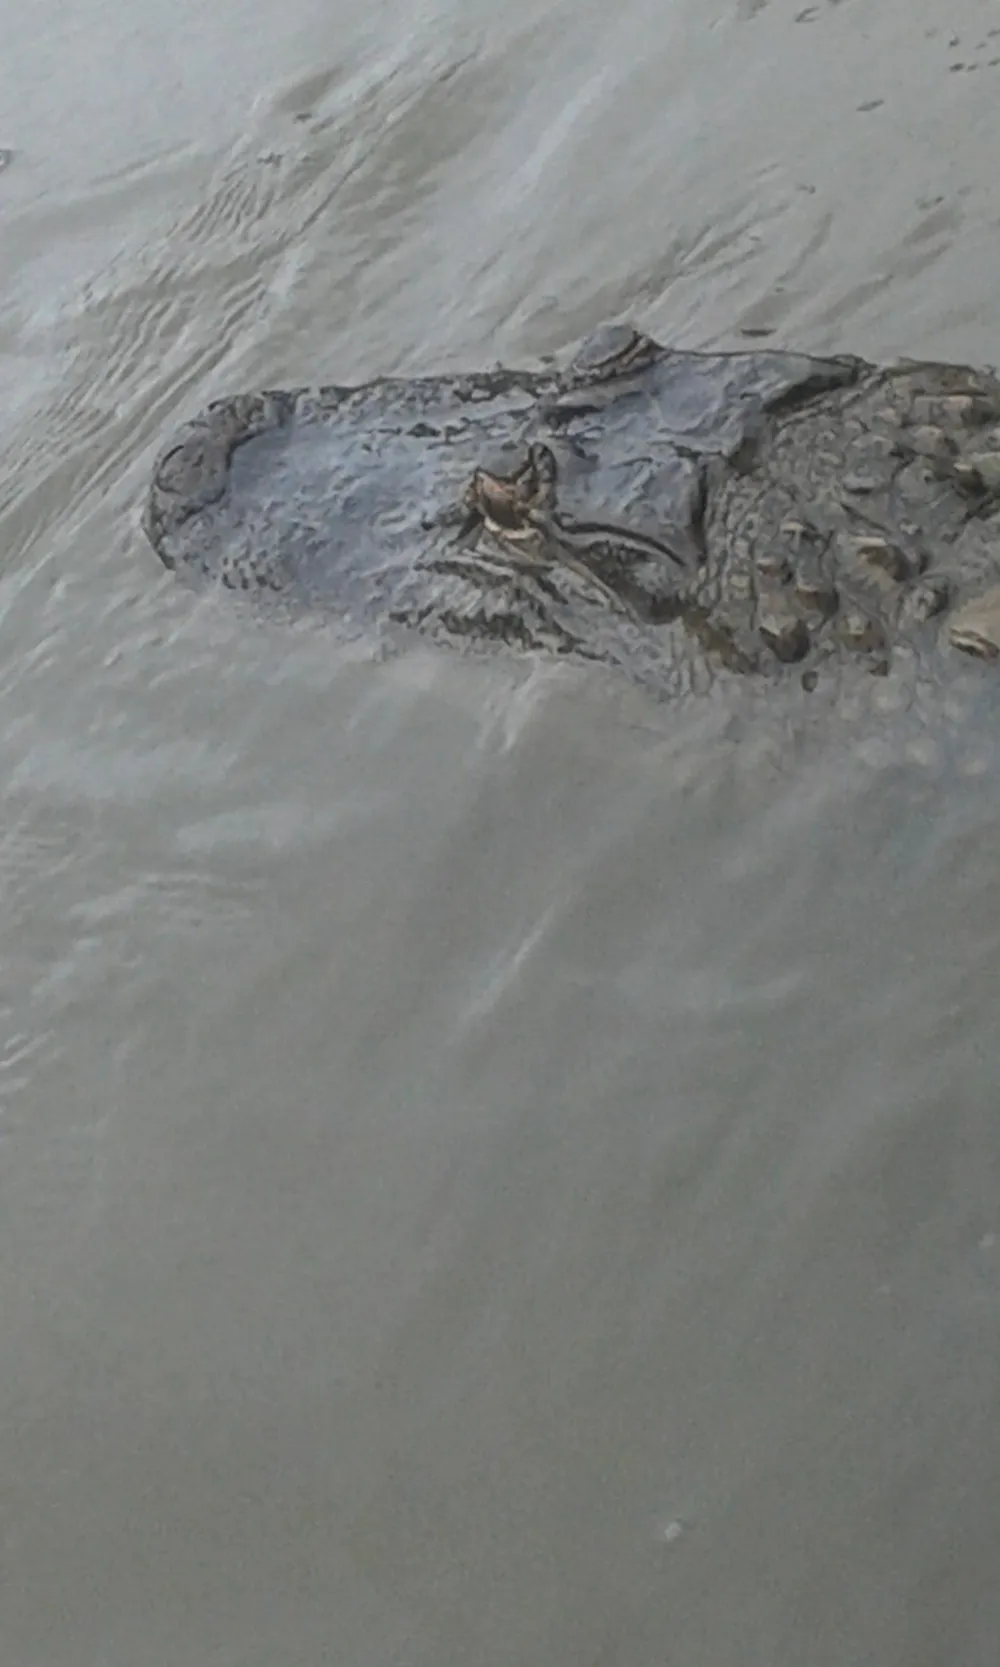 The image shows the head of a crocodile partially submerged in water its eyes and snout visible just above the surface